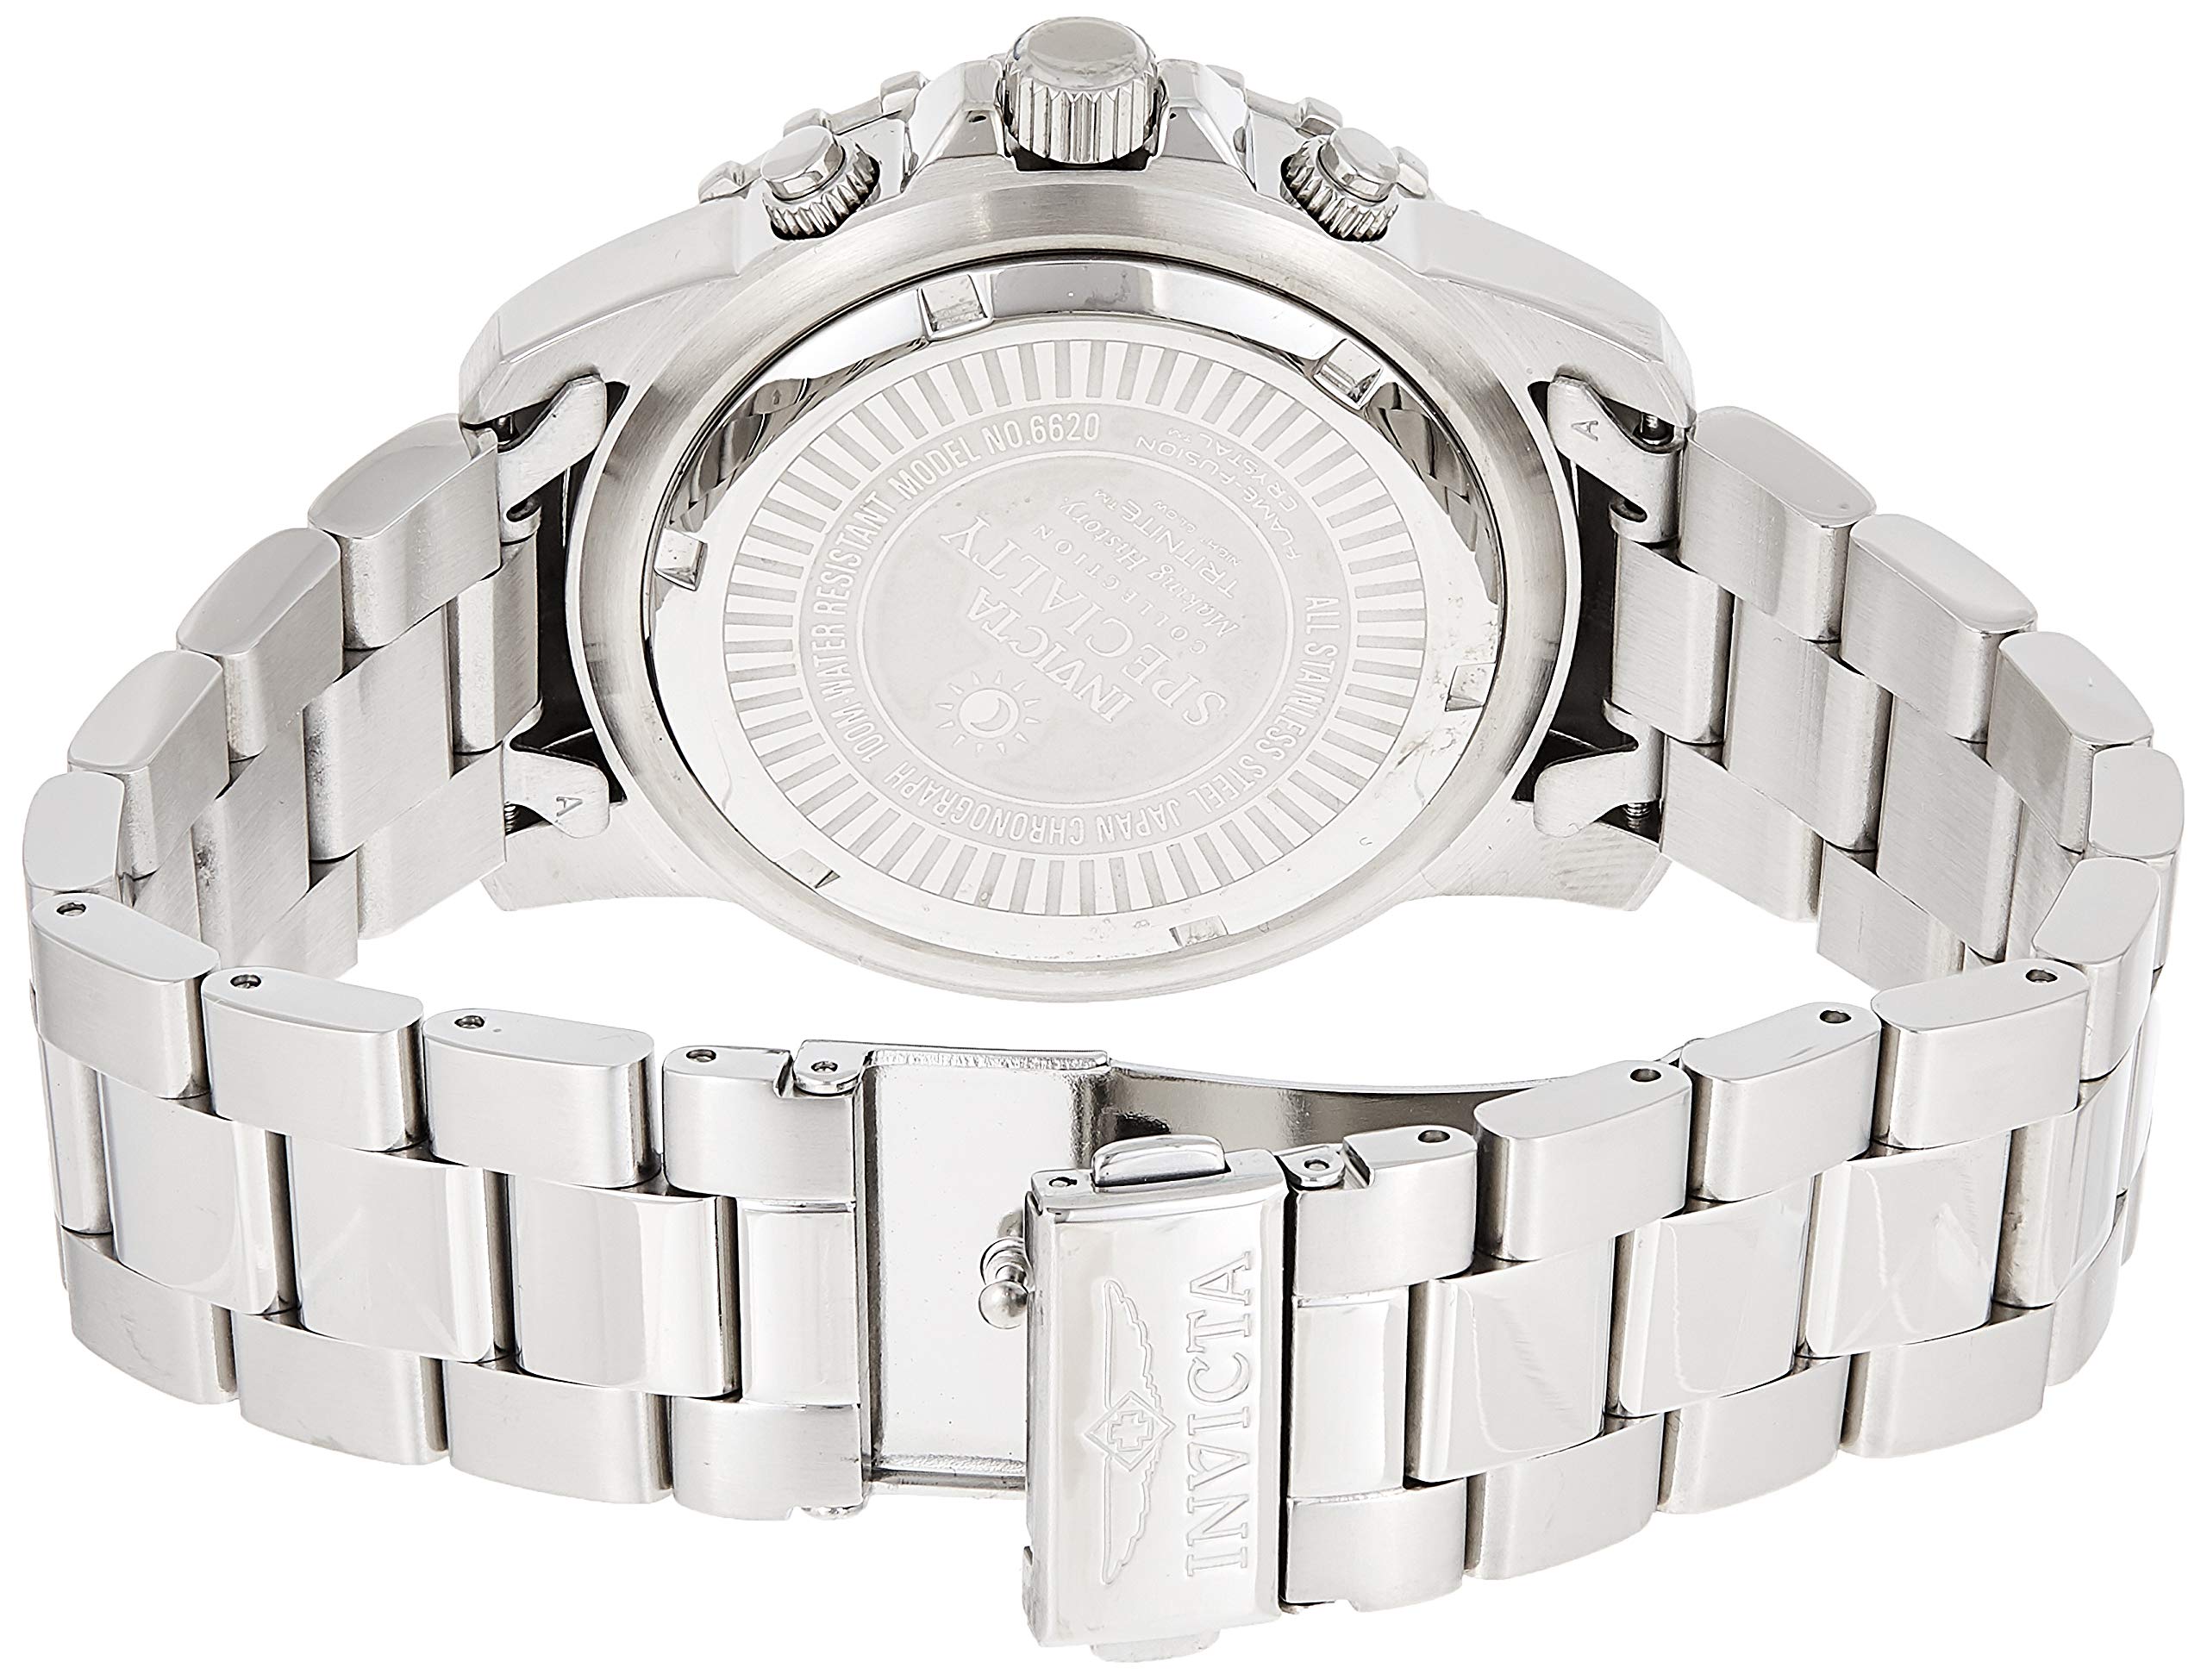 Invicta Men's Specialty Quartz Watch with Stainless Steel Band